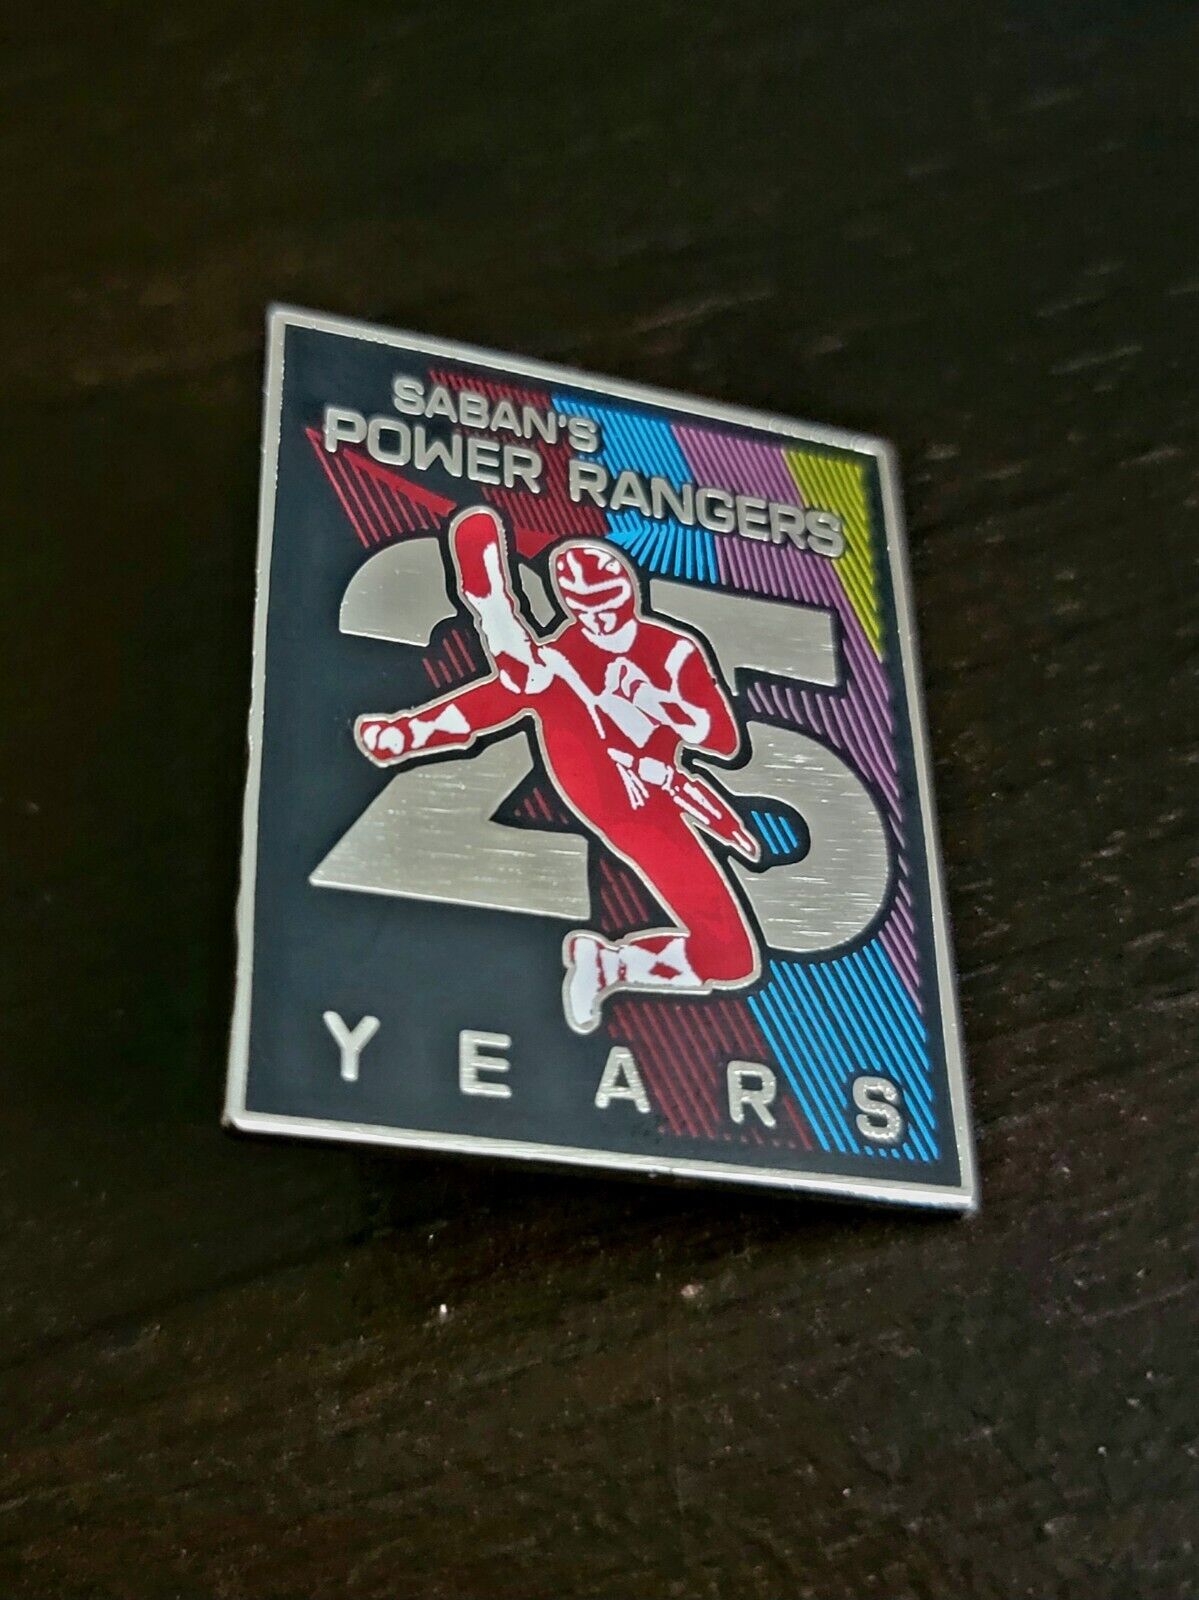 Rare Power Rangers 25th Anniversary Pin - Limited Edition Convention Exclusive 